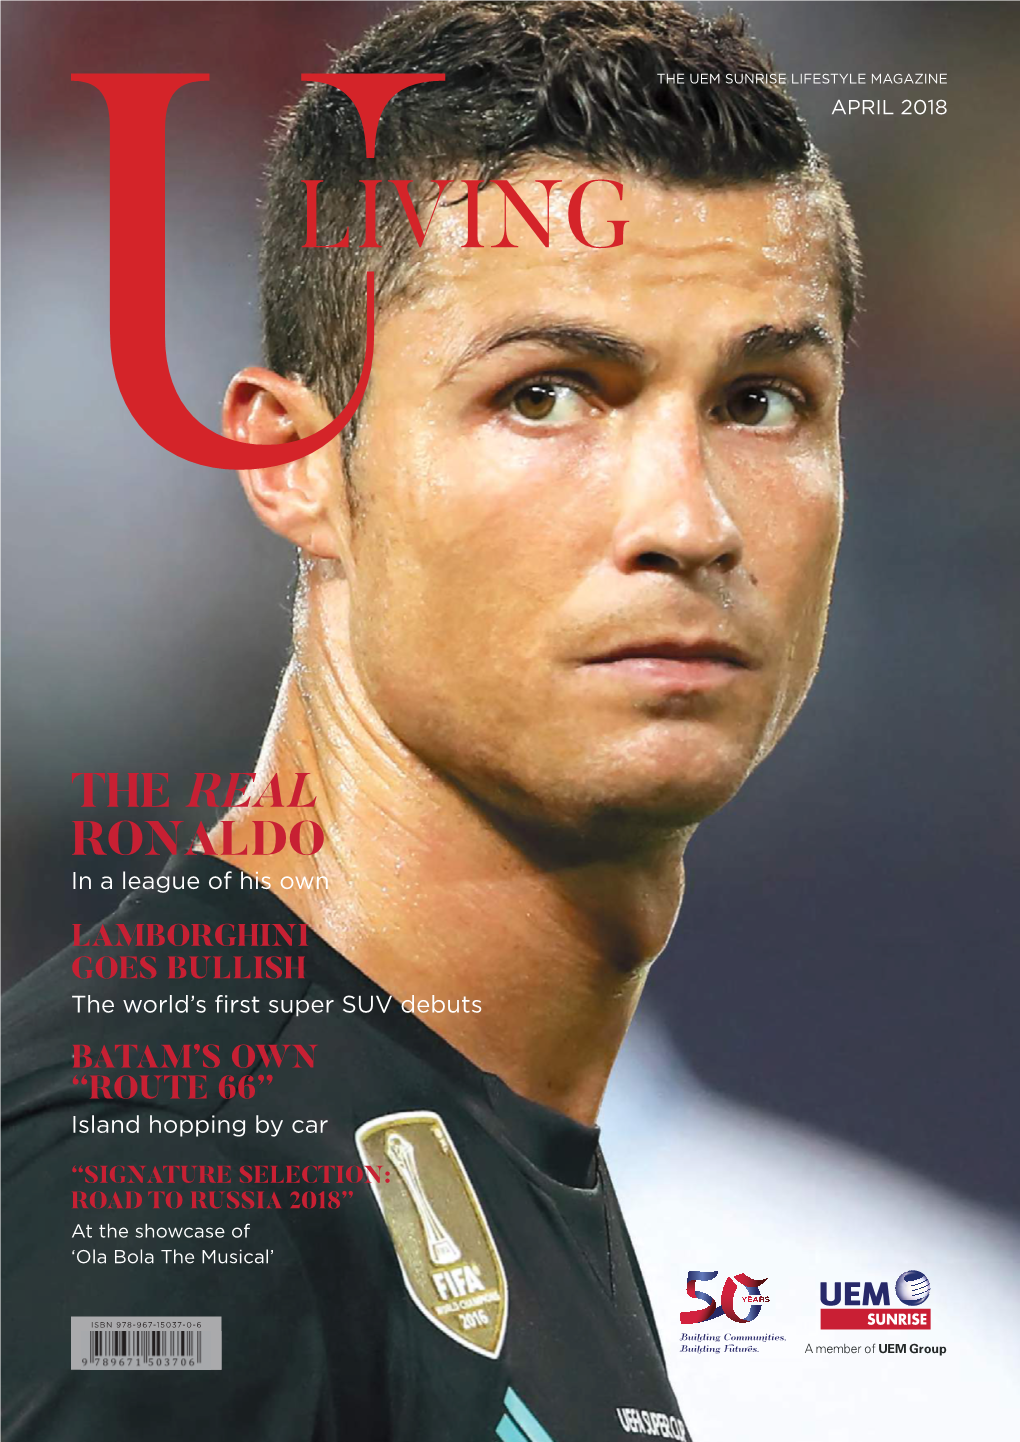 THE REAL RONALDO in a League of His Own